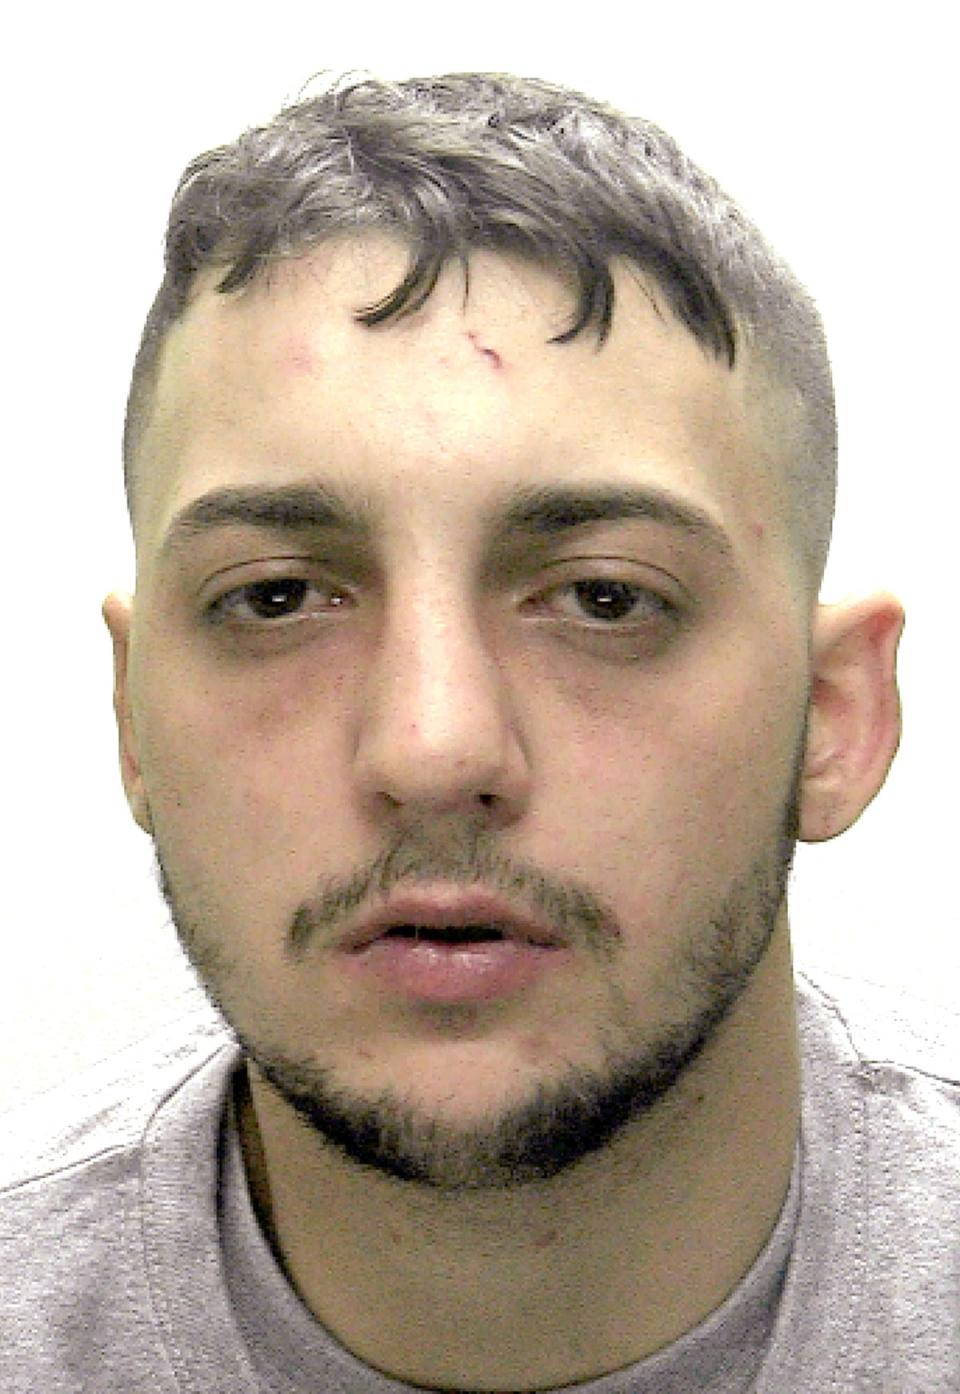 Jake Hill, 25, who stabbed five people in a matter of seconds outside the Eclipse nightclub in Bodmin, Cornwall, with a serrated hunting knife. (Devon and Cornwall Police/PA Wire)